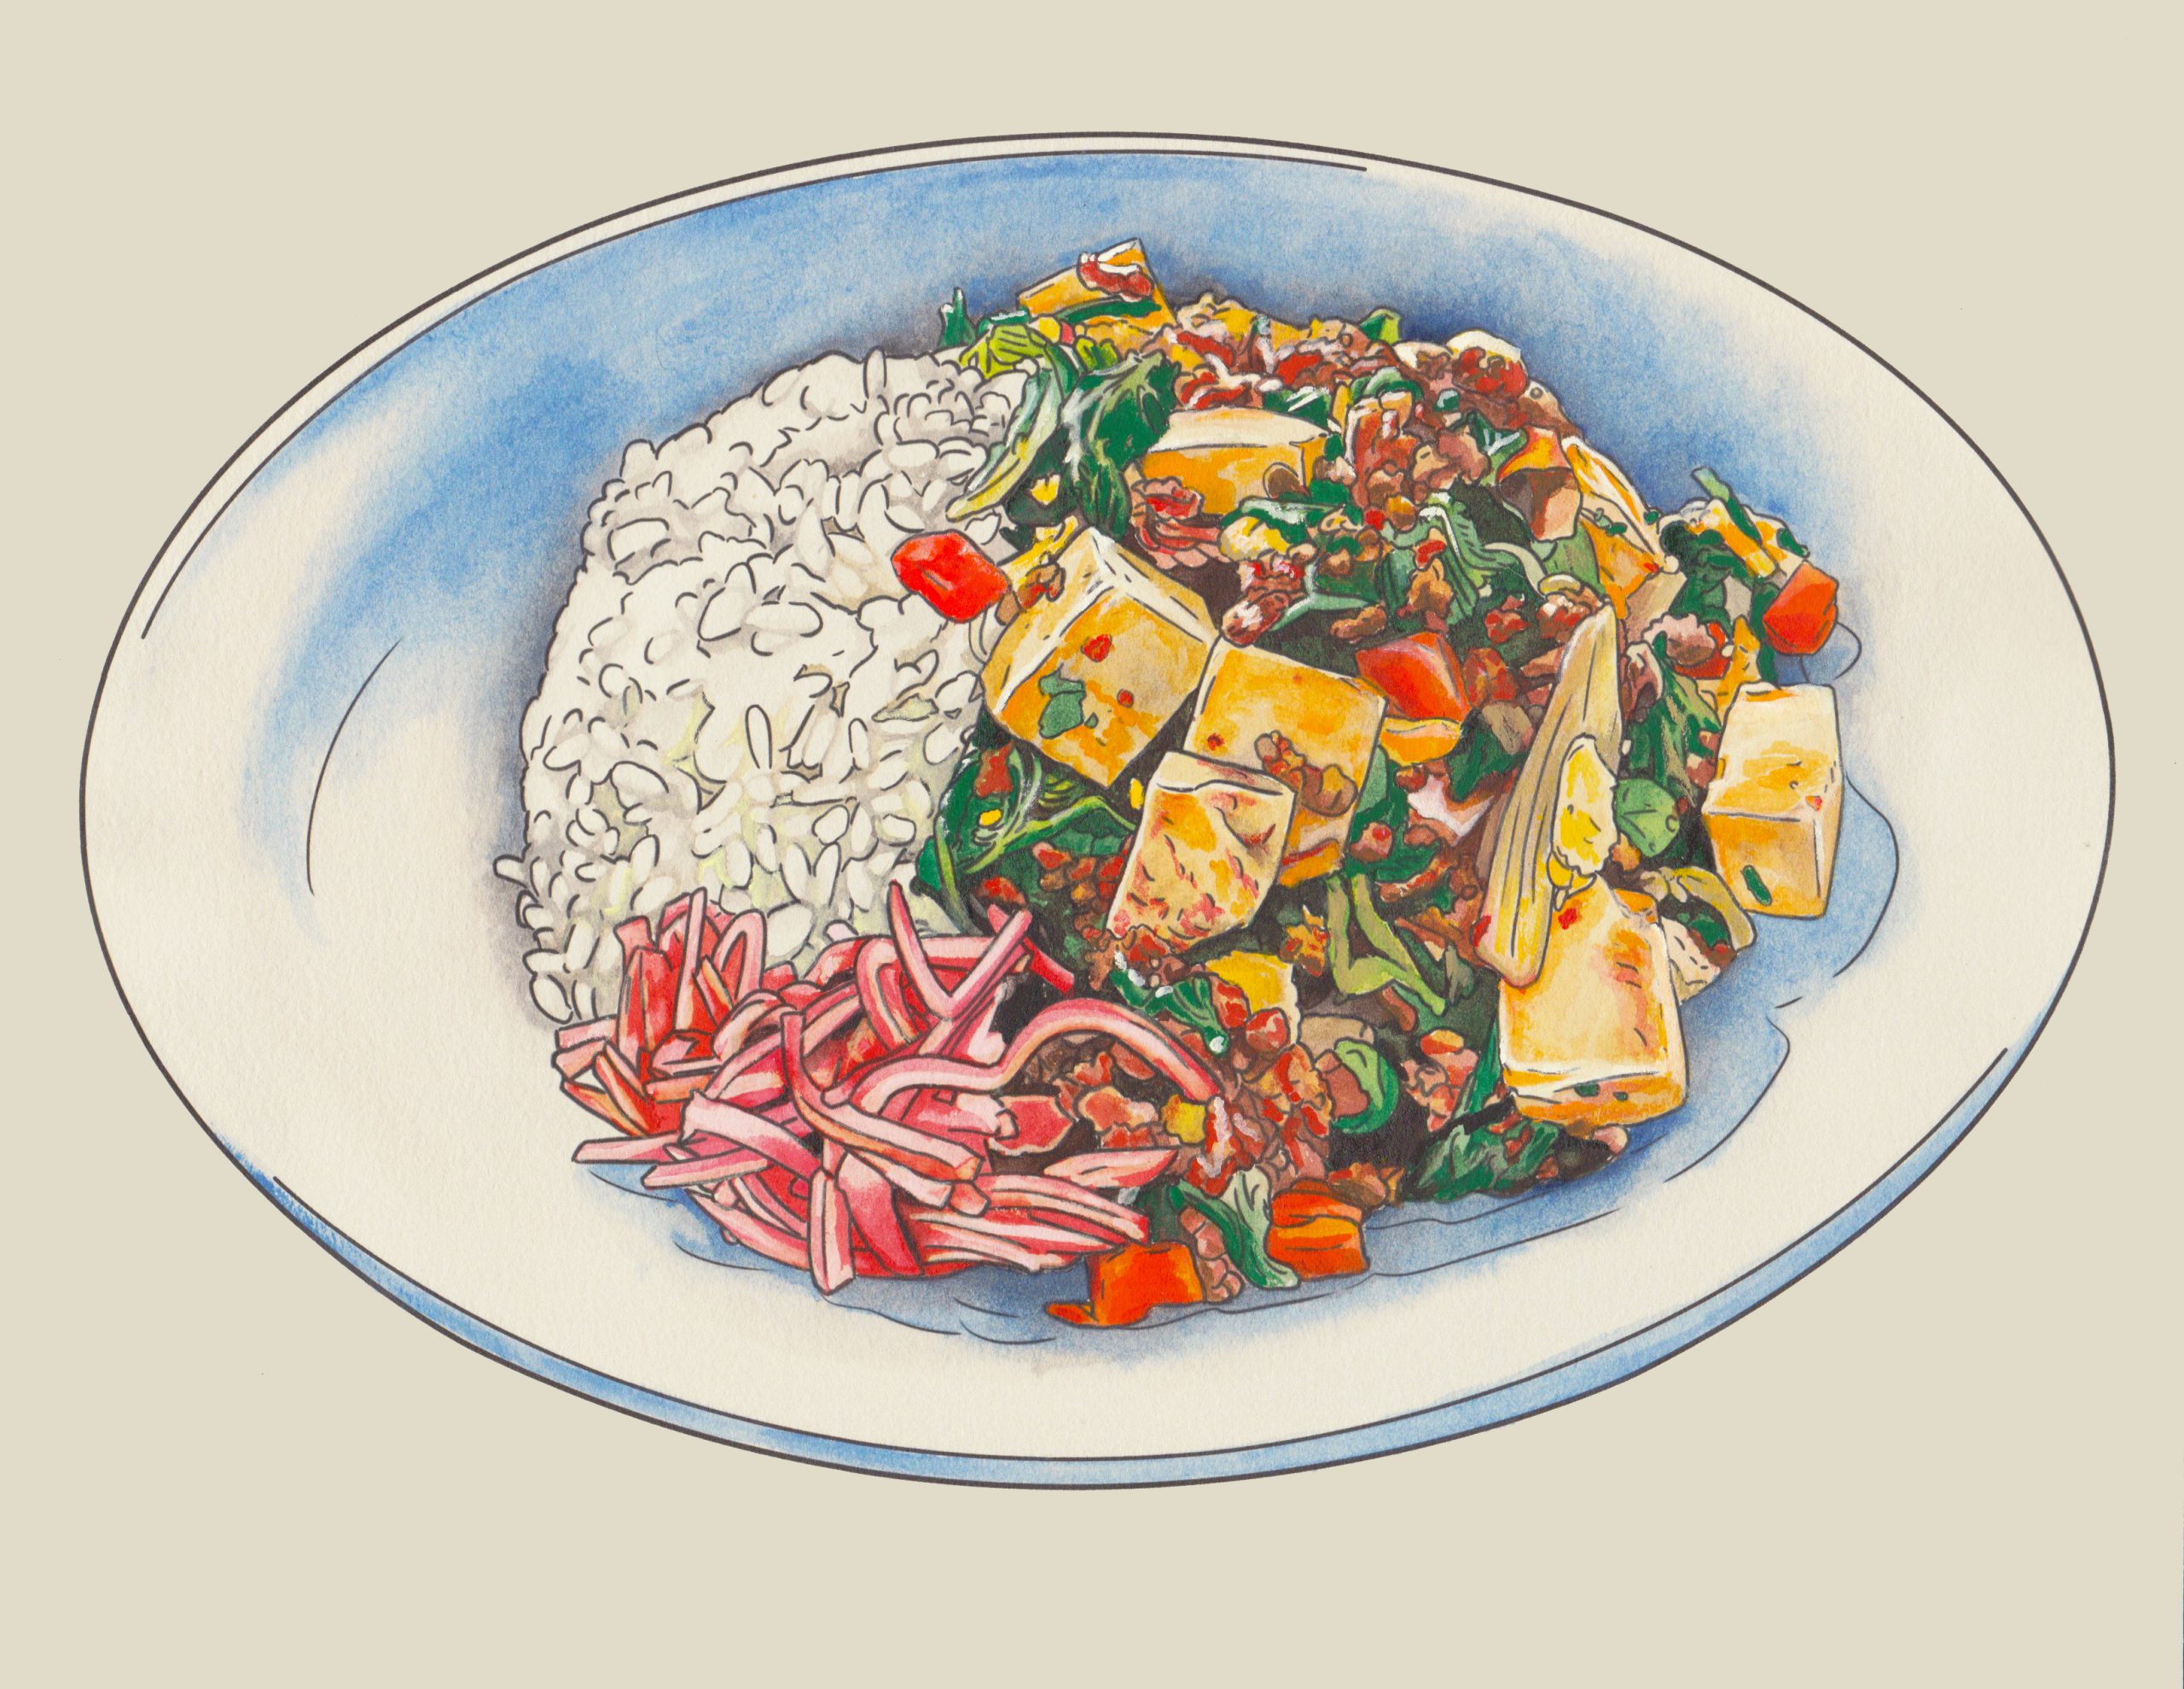 The recipe drawing is a watercolor and gouache painting done on paper that is depicting a plate with a cup of white rice on one end of the plate, garnished with red colored pickled ginger, along with the ingredients of the mapo tofu such as ground meat, onions, spinach, carrots and peas. 